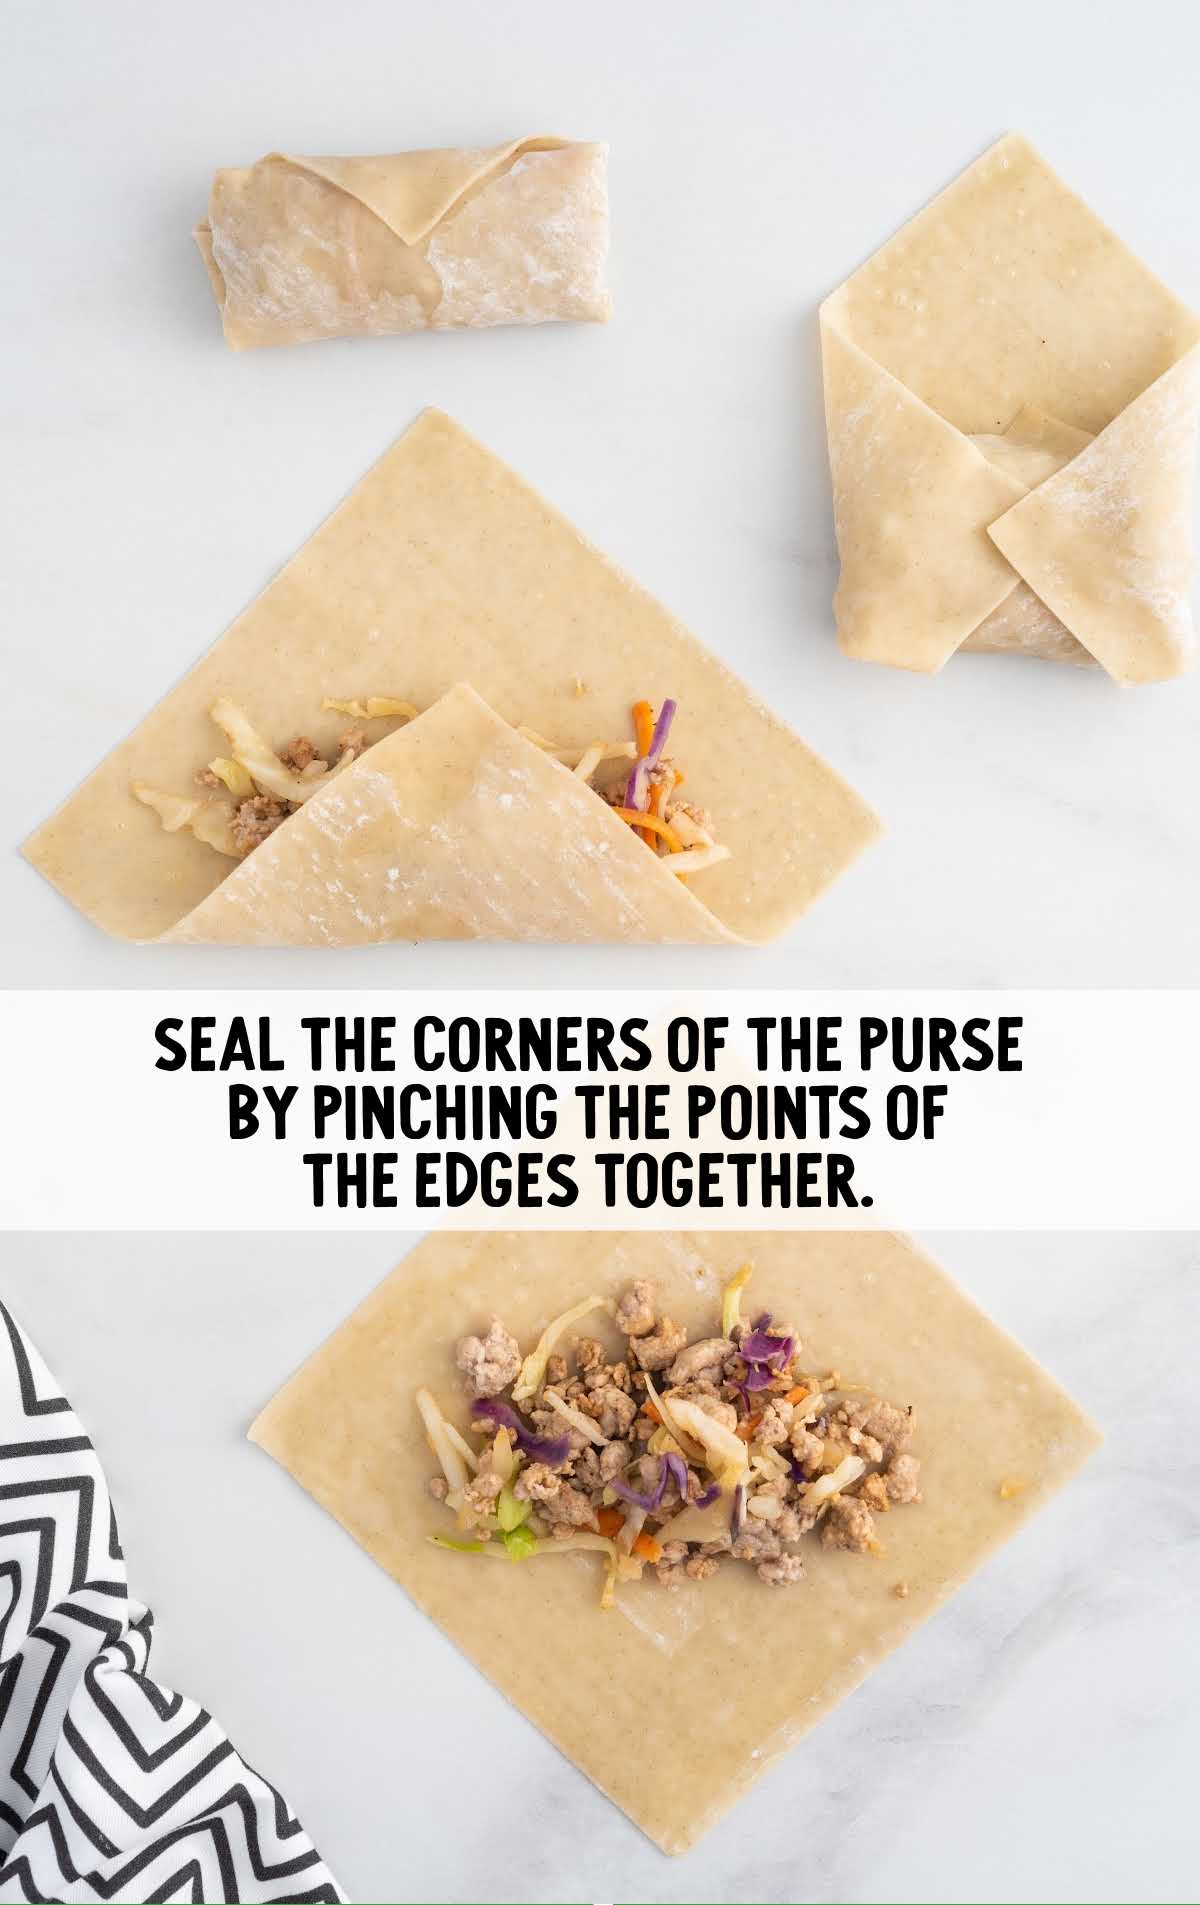 fold egg rolls by pitching the corners and edge together